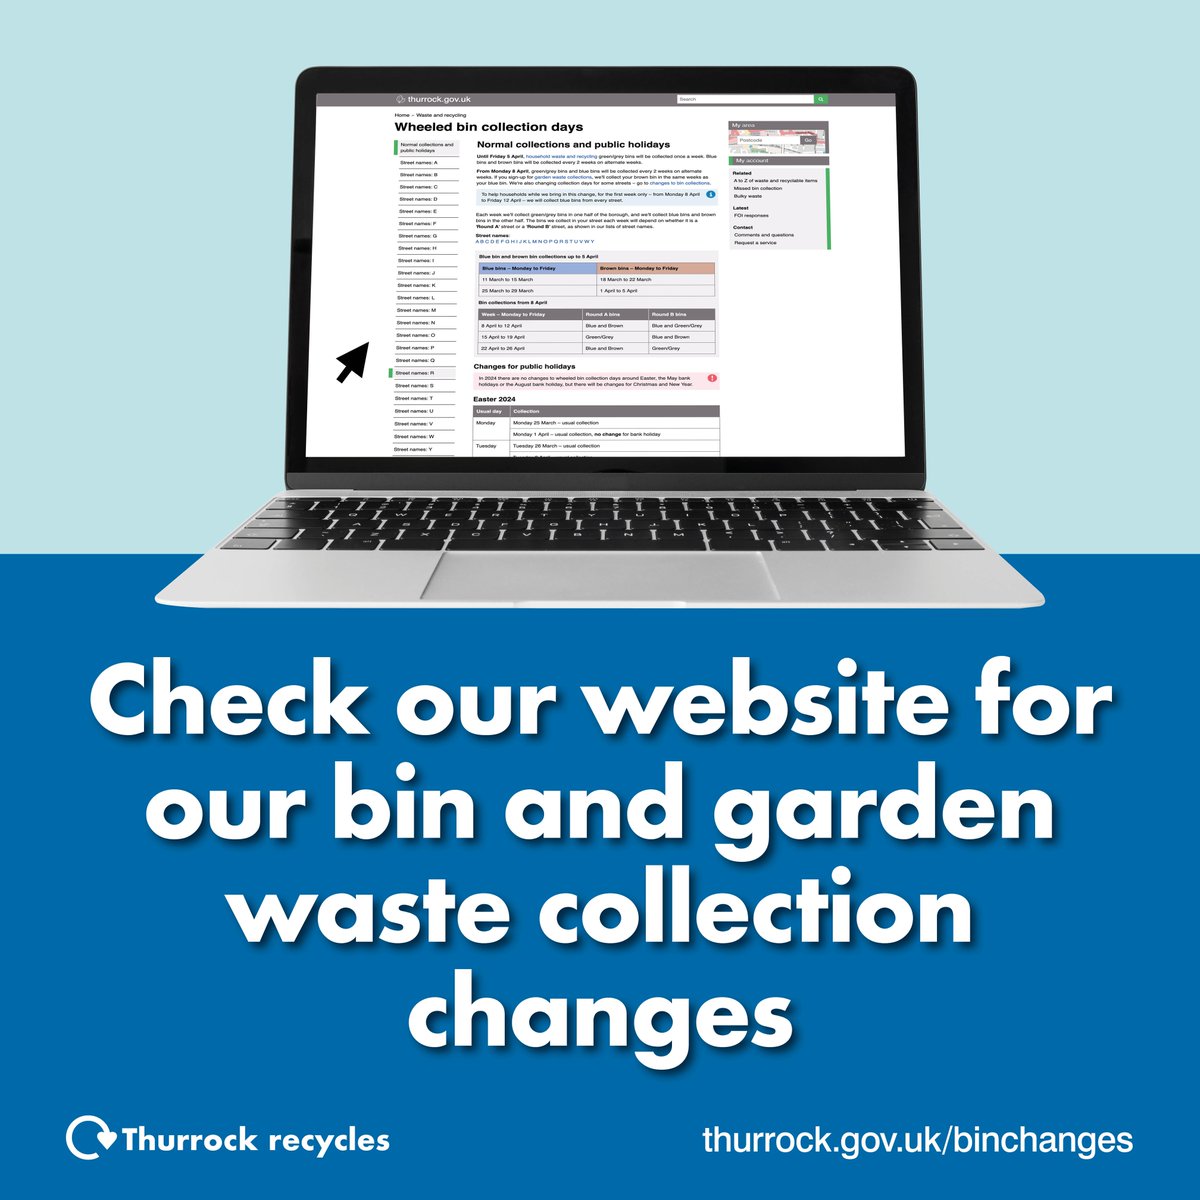 Your street may have a new bin collection schedule. Find out when yours take place at orlo.uk/wheeled-bin-co…